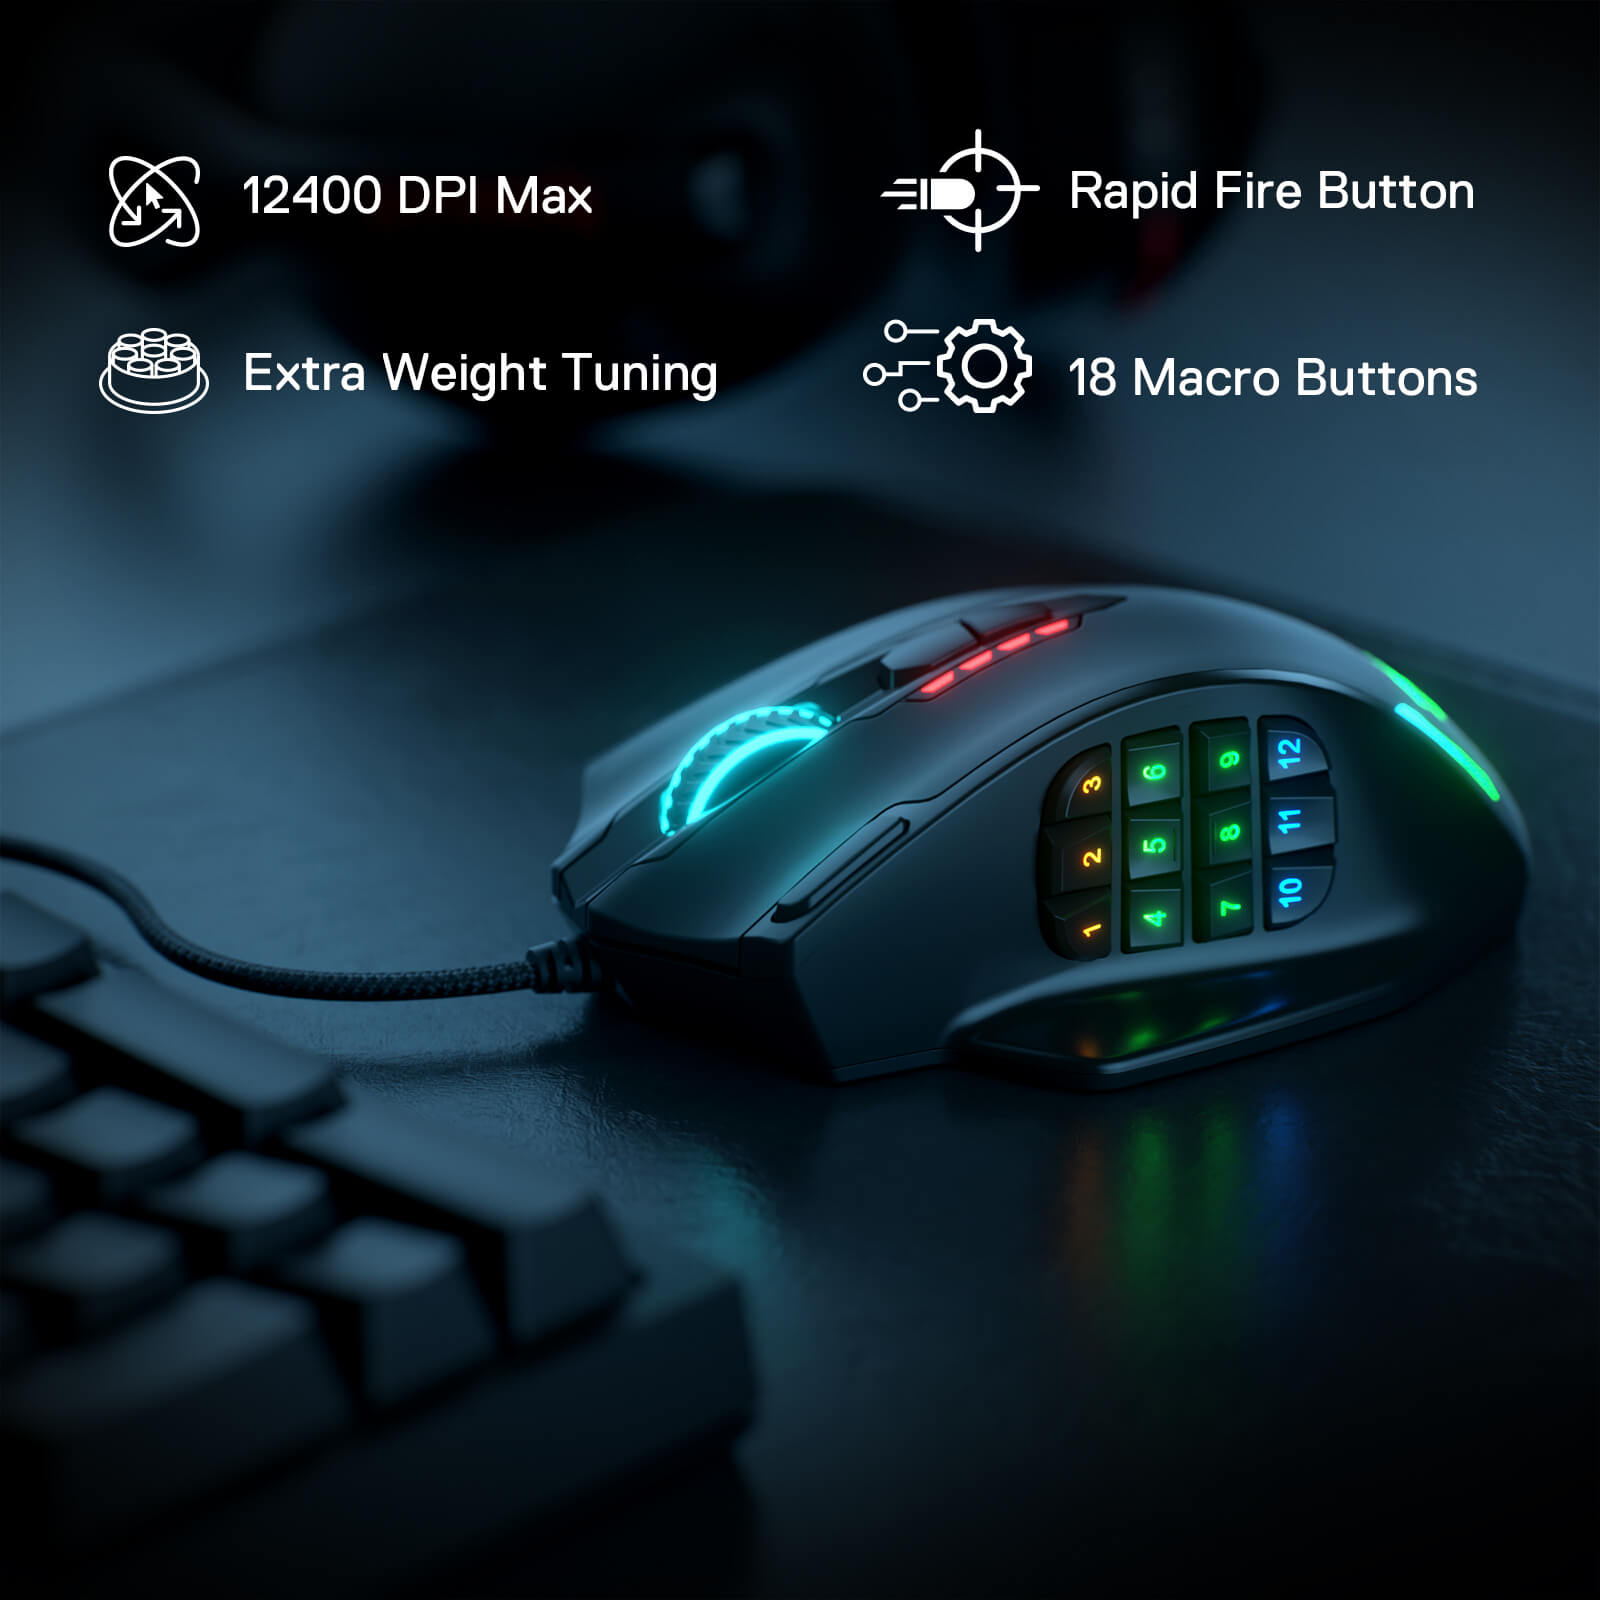 Redragon Impact M908 RGB MMO Laser Wired Gaming Mouse